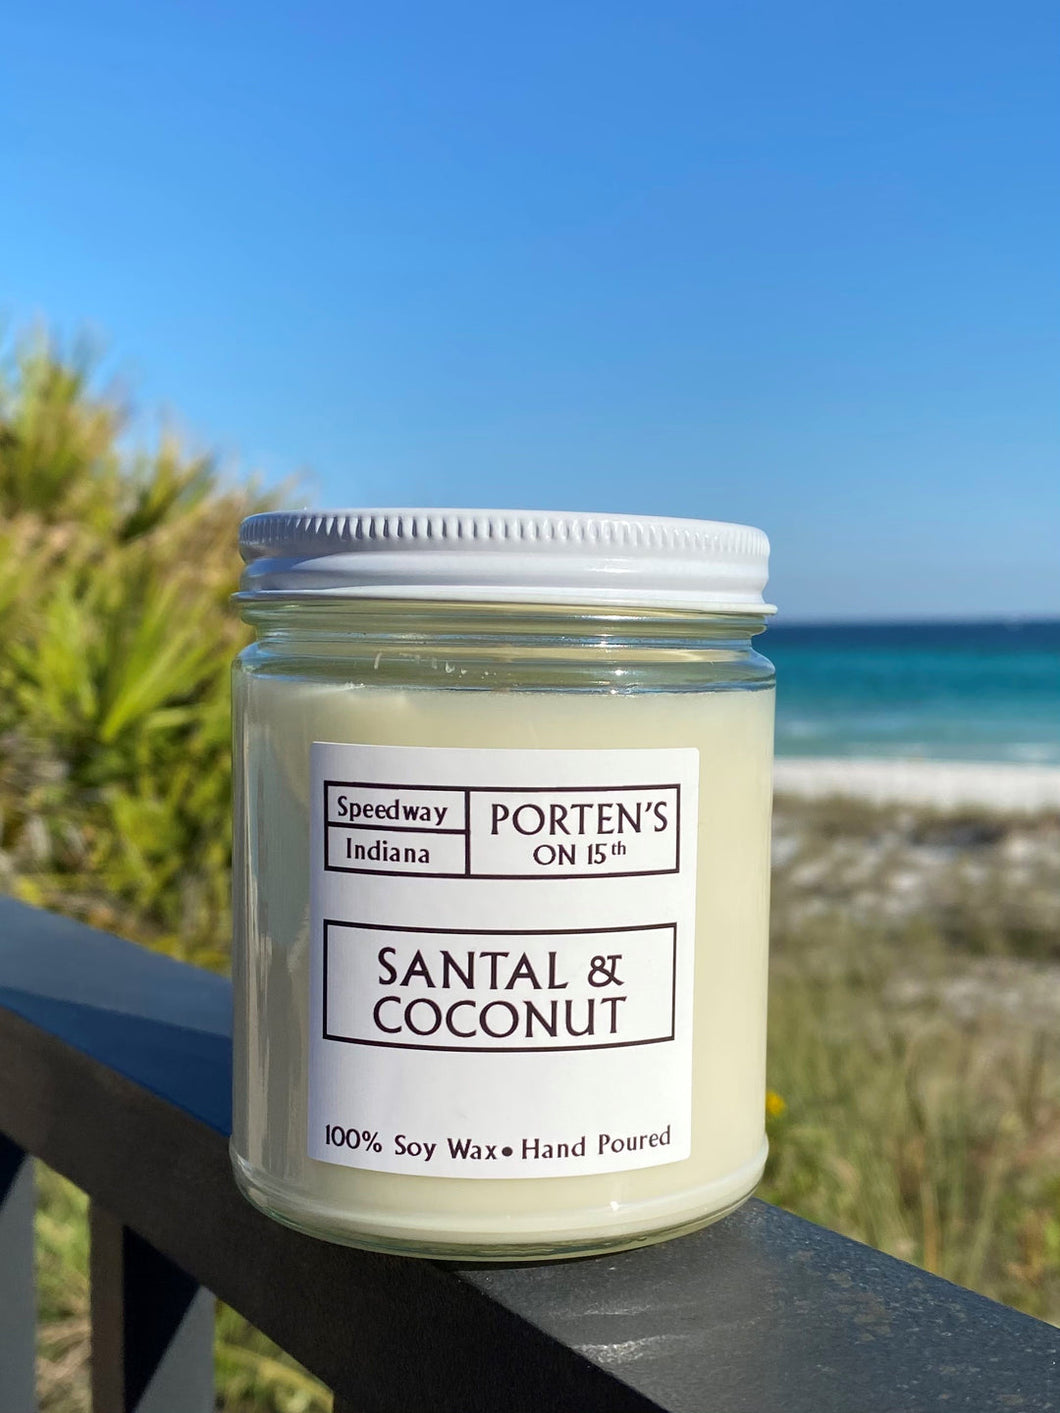 Santal & Coconut Soy Candle